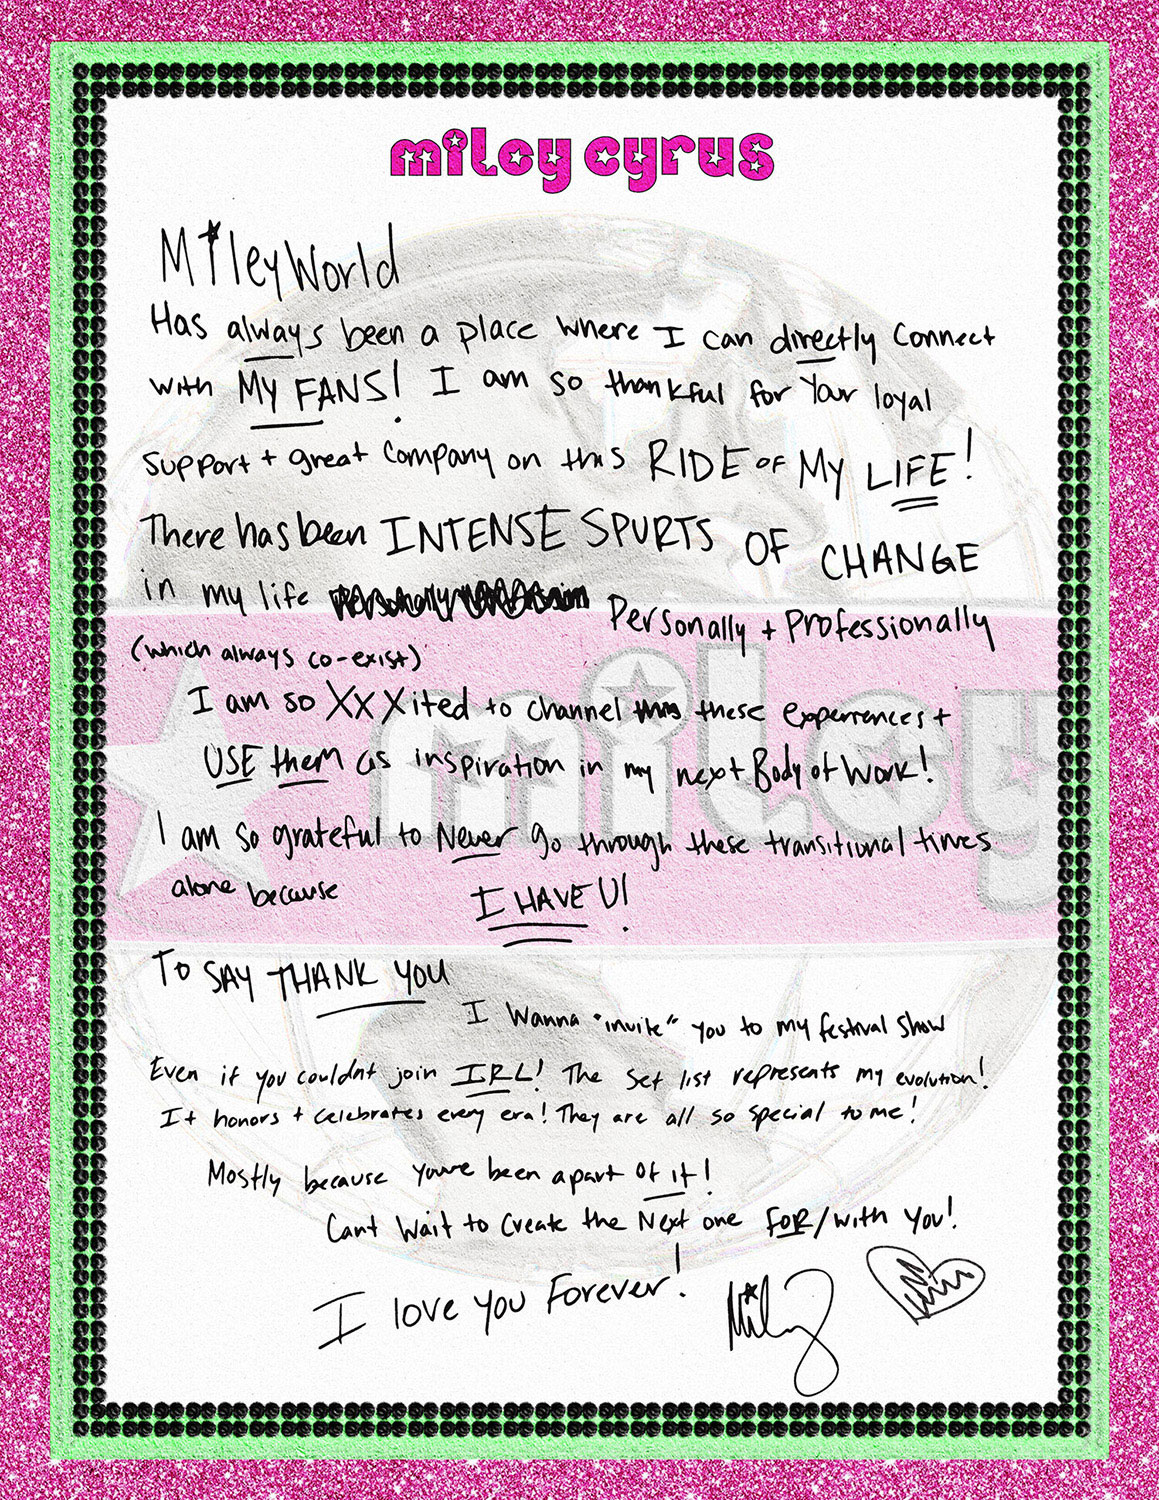 Miley Cyrus pens note highlighting ‘intense spurts of change’